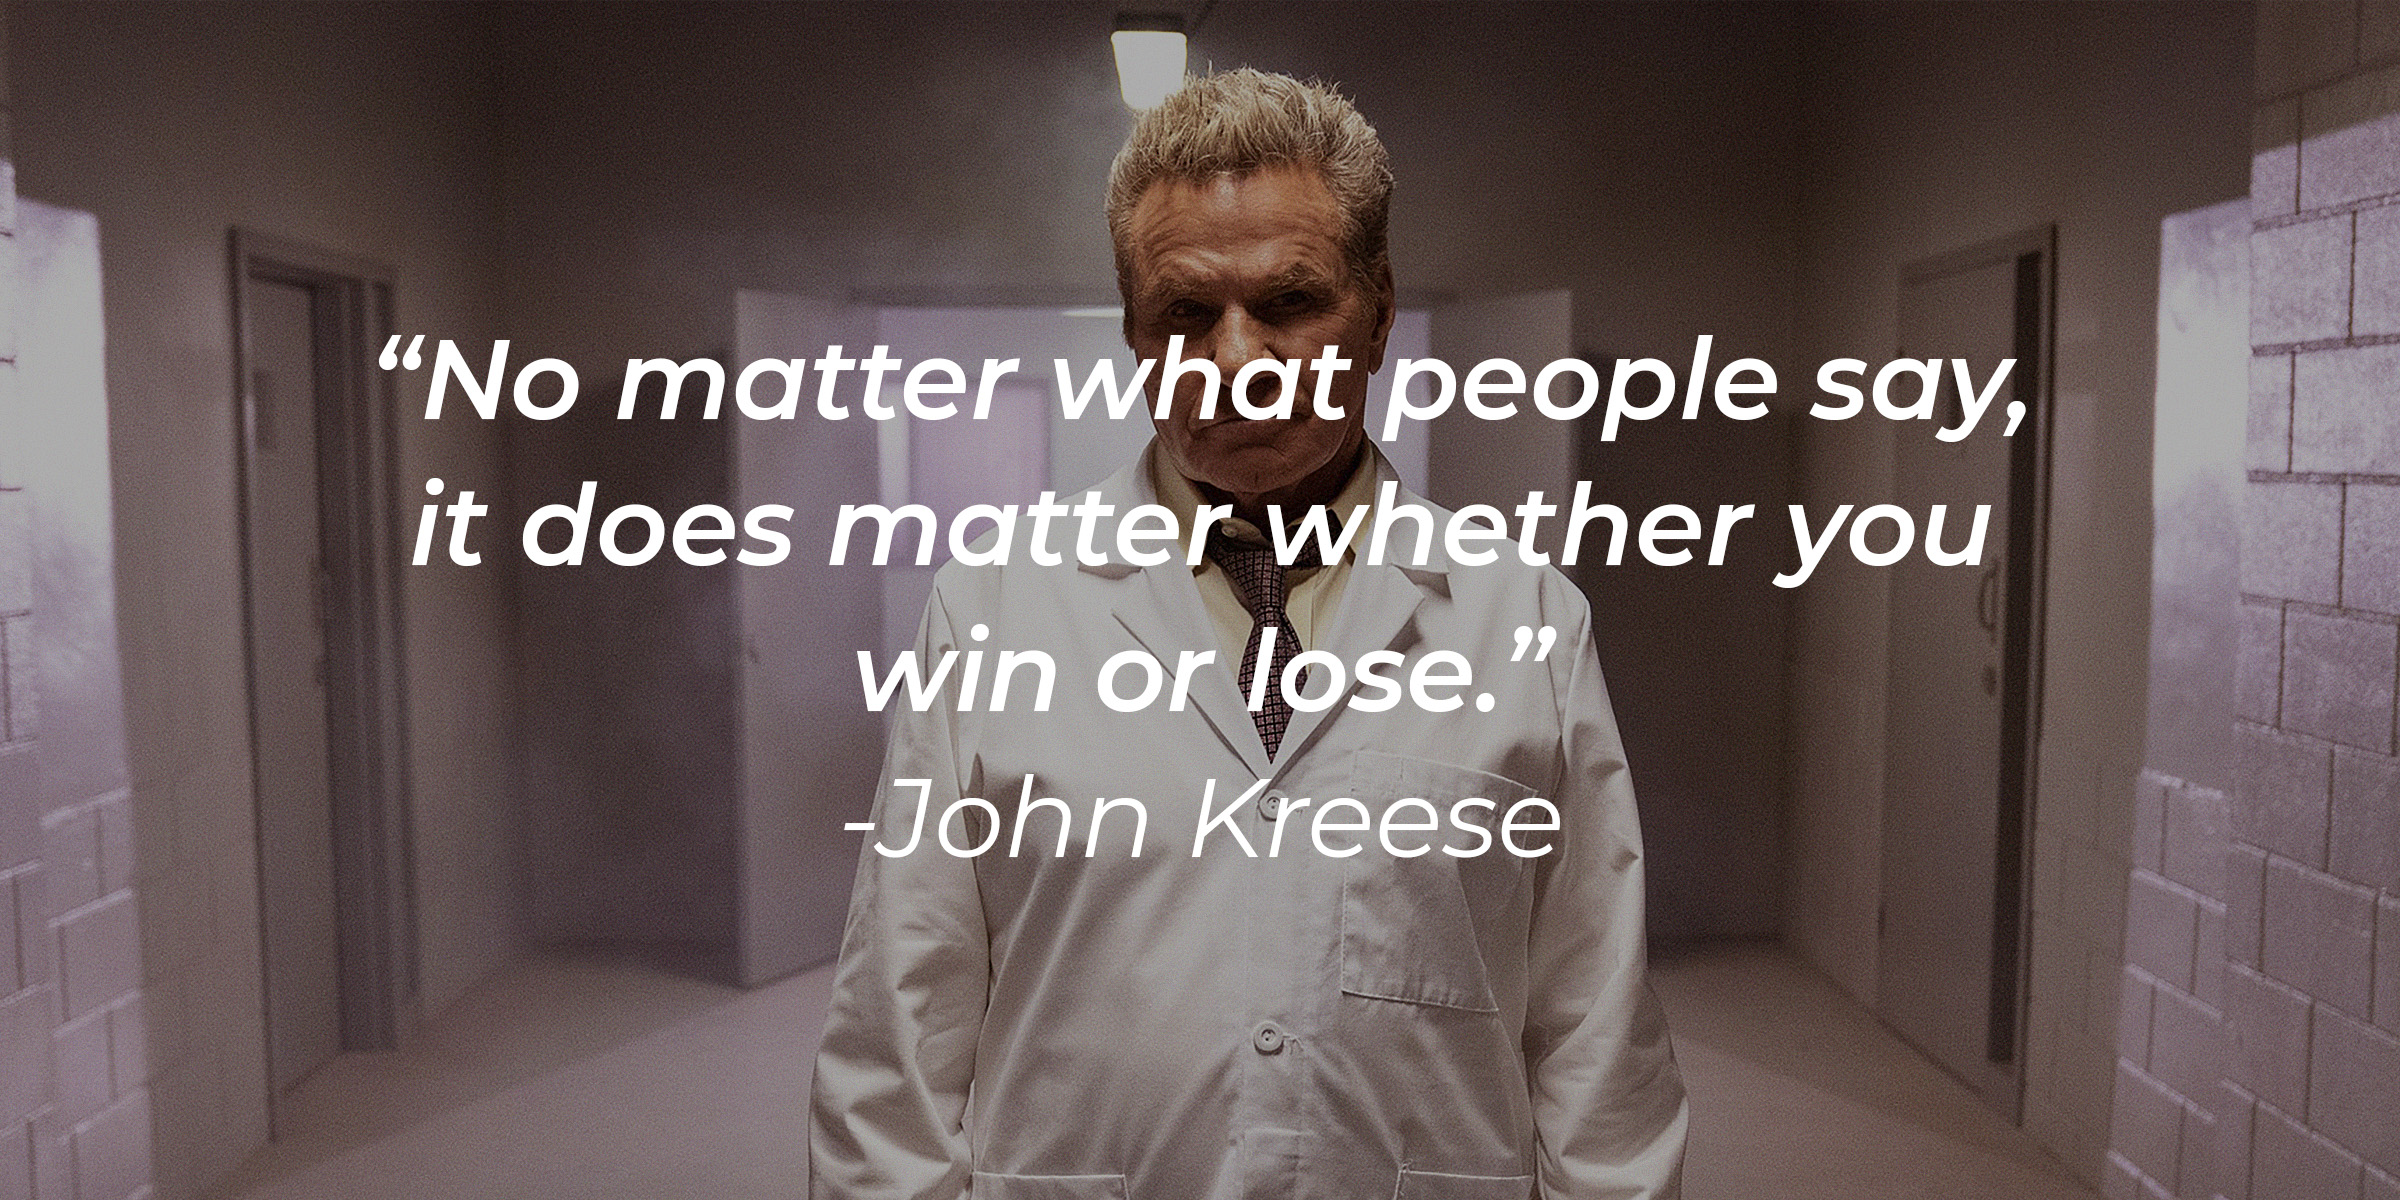 John Kreese, with his quote: “No matter what people say, it does matter whether you win or lose.” │ Source: facebook.com/CobraKaiSeries